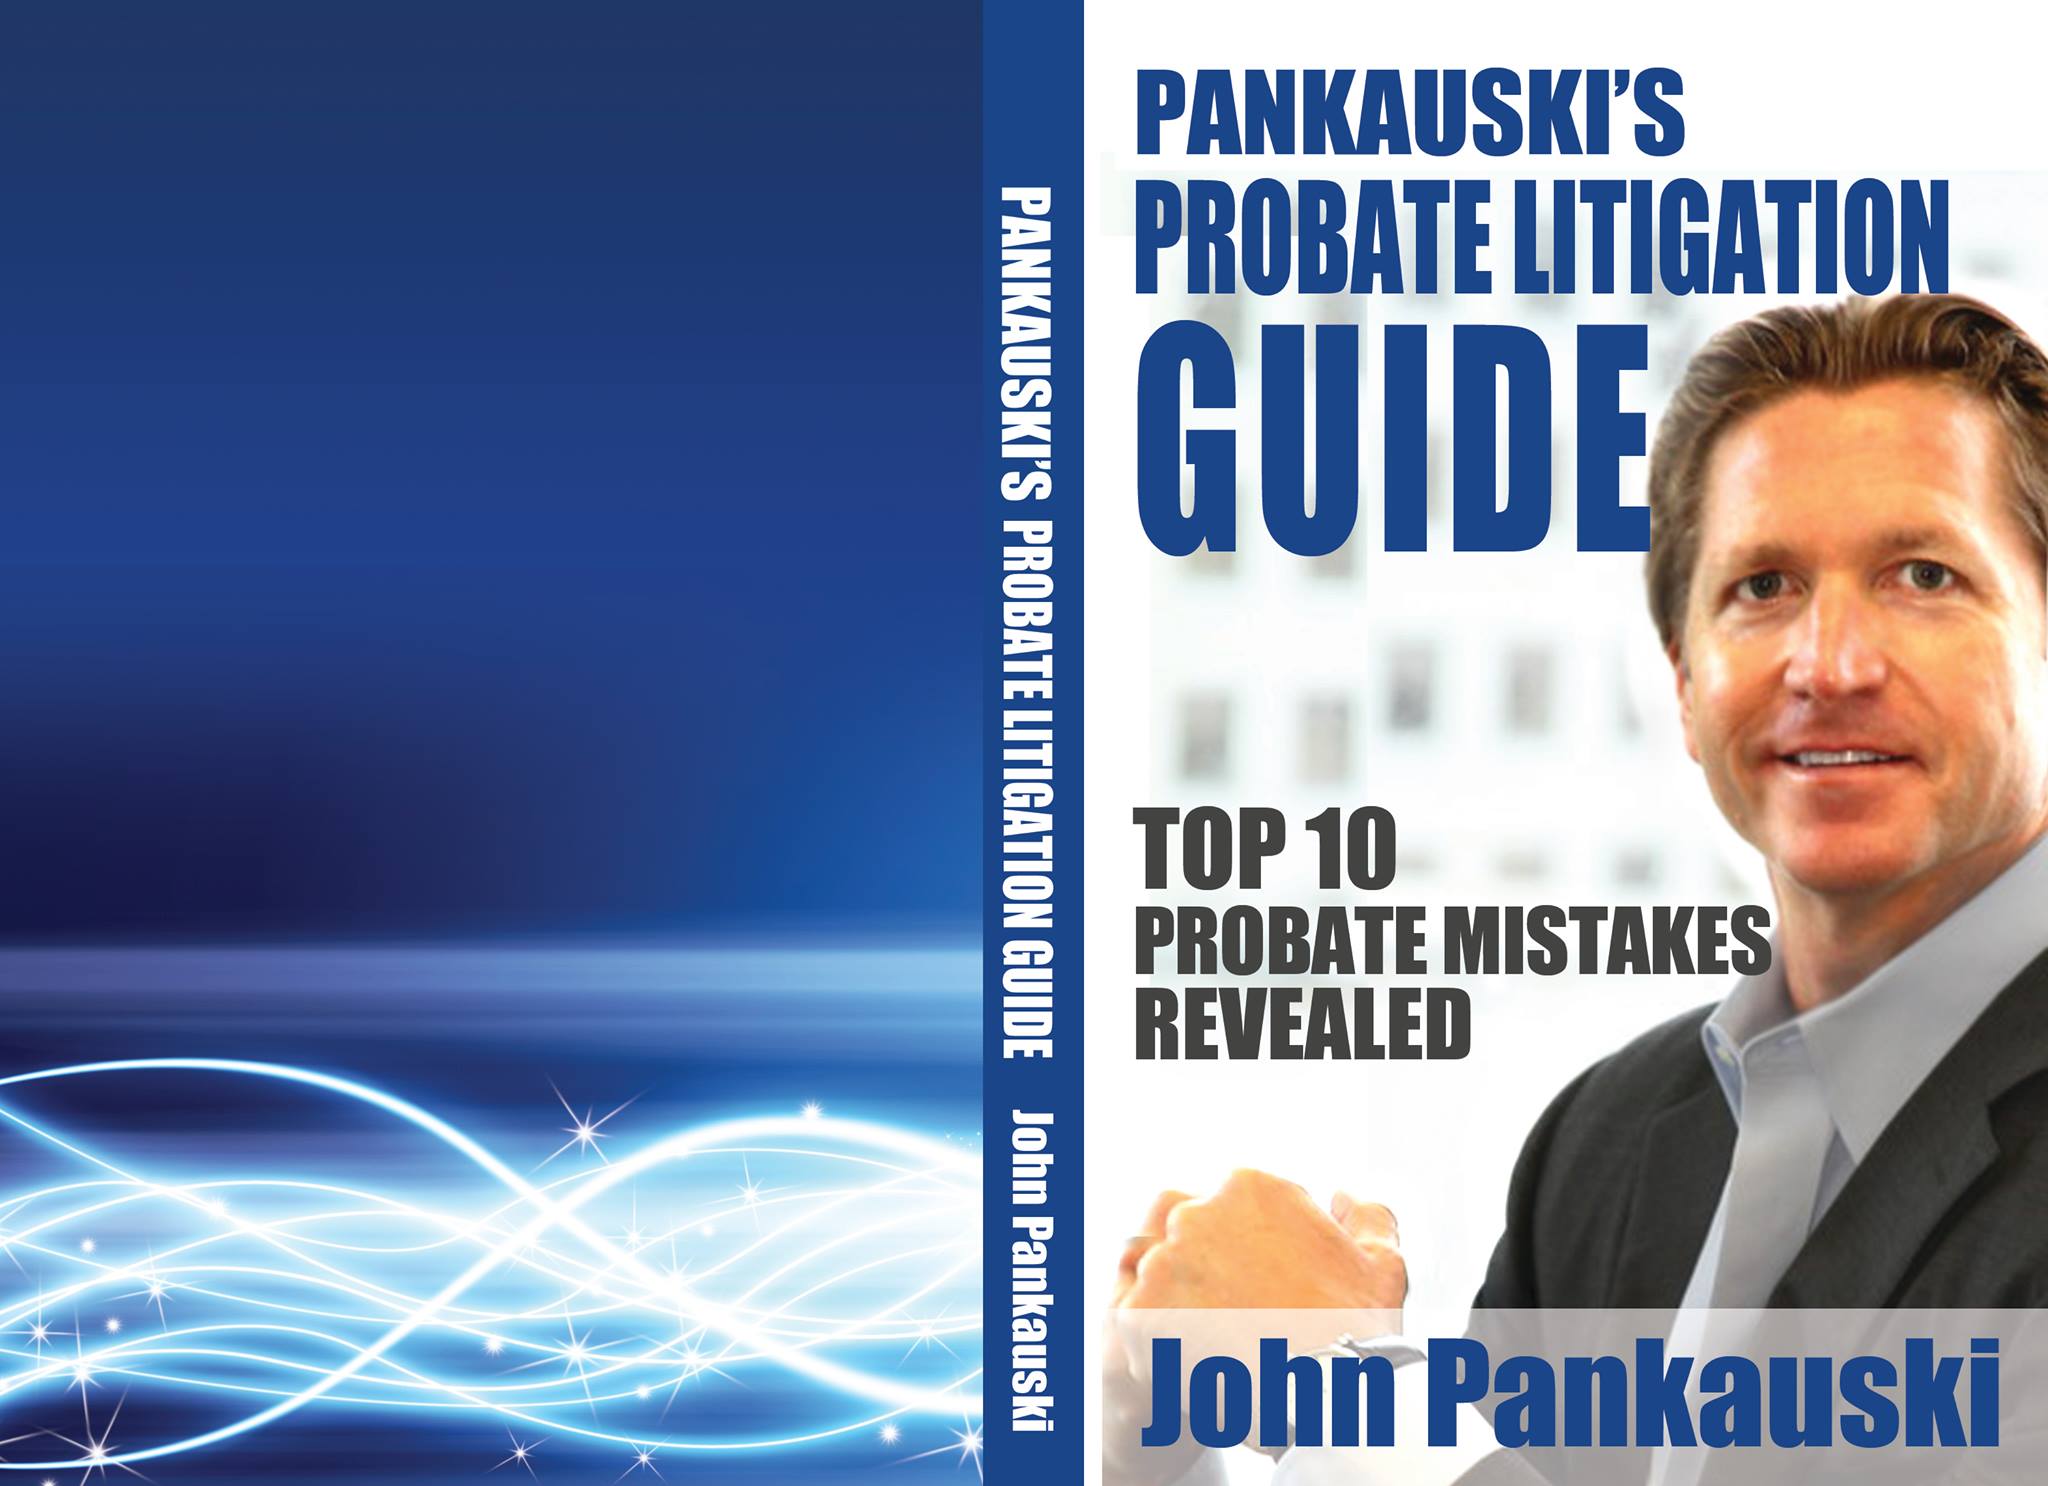 post about COMING SOON: Pankauski’s Probate Litigation Guide:Top 10 Probate Mistakes Revealed